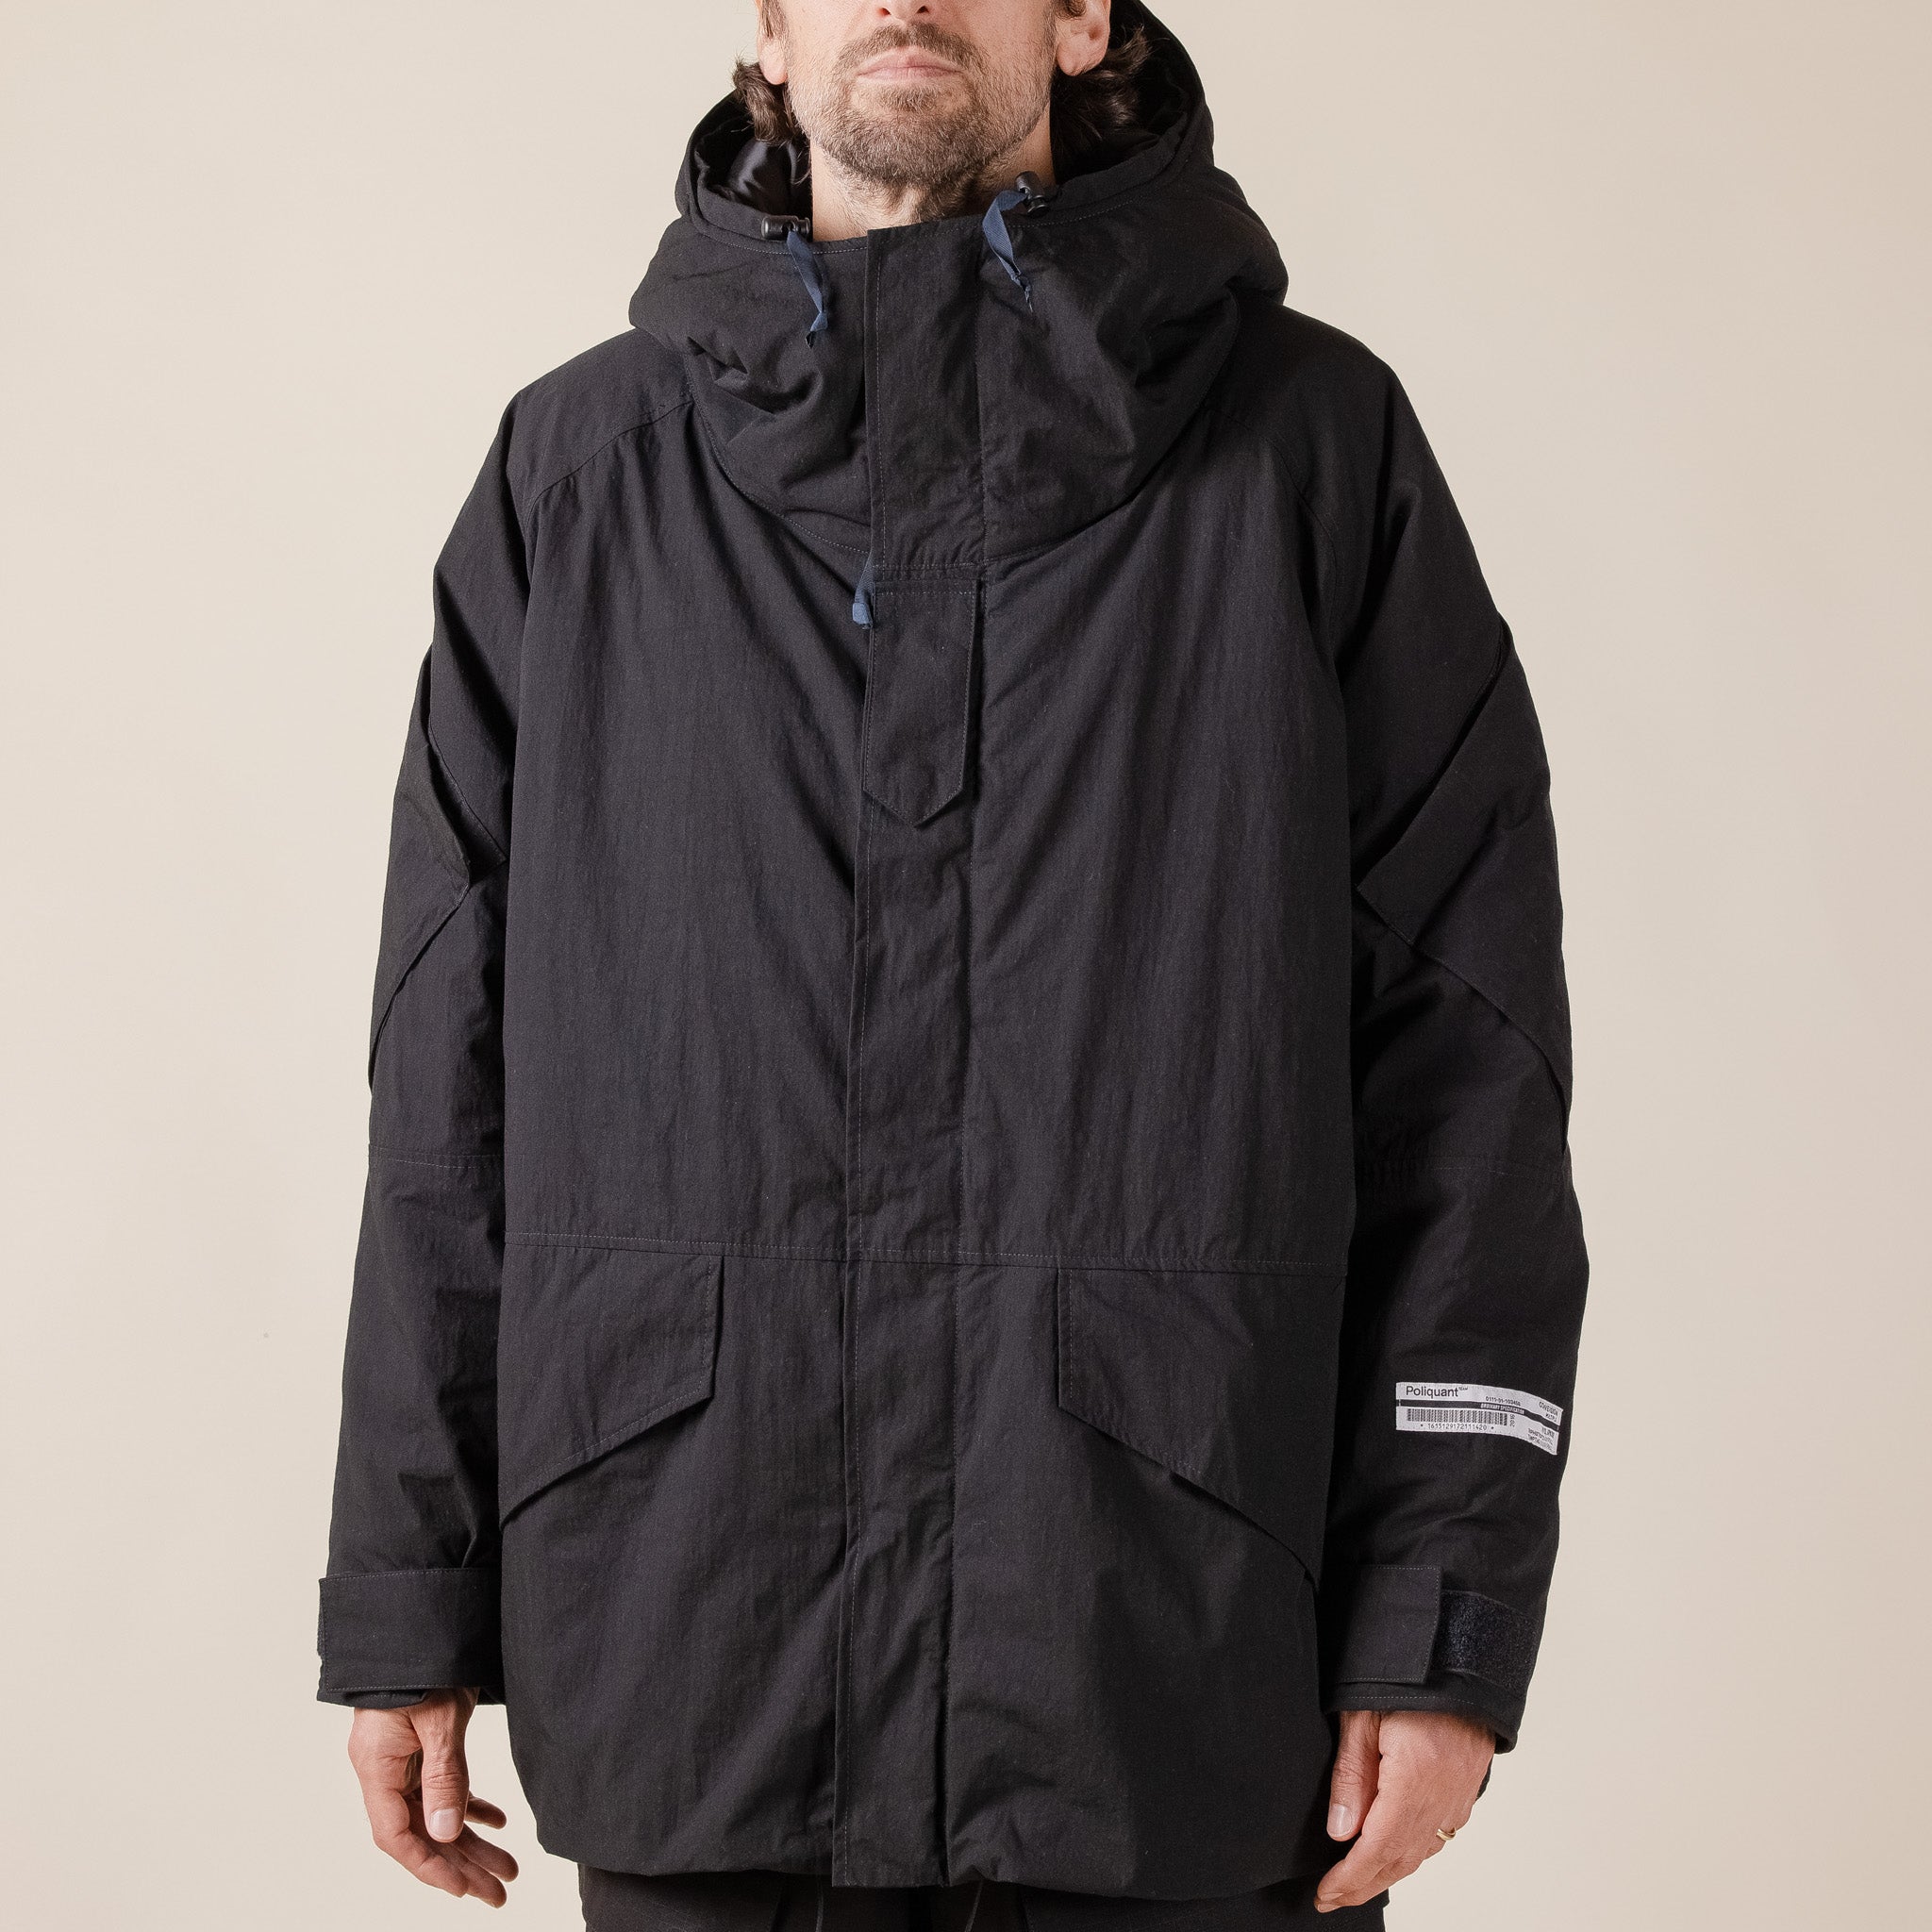 Poliquant - E.C.W.C.S. Hooded Field Jacket - Black "poliquant stockists" "poliquant japan" "poliquant usa"